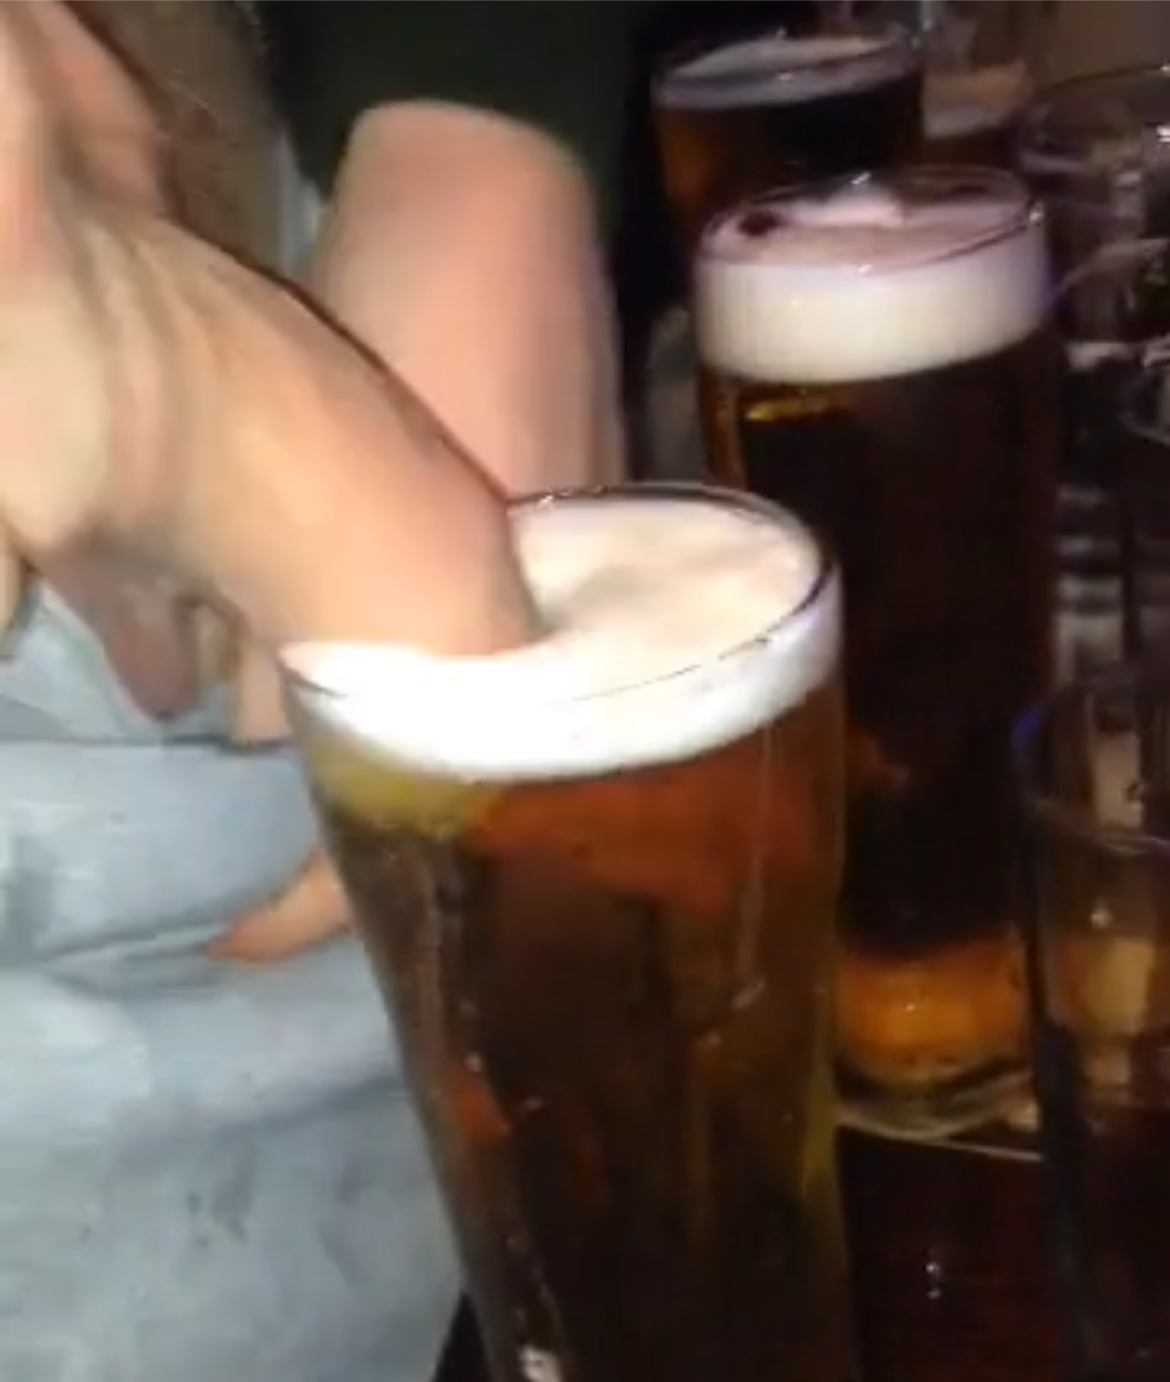 Thick dick in beer